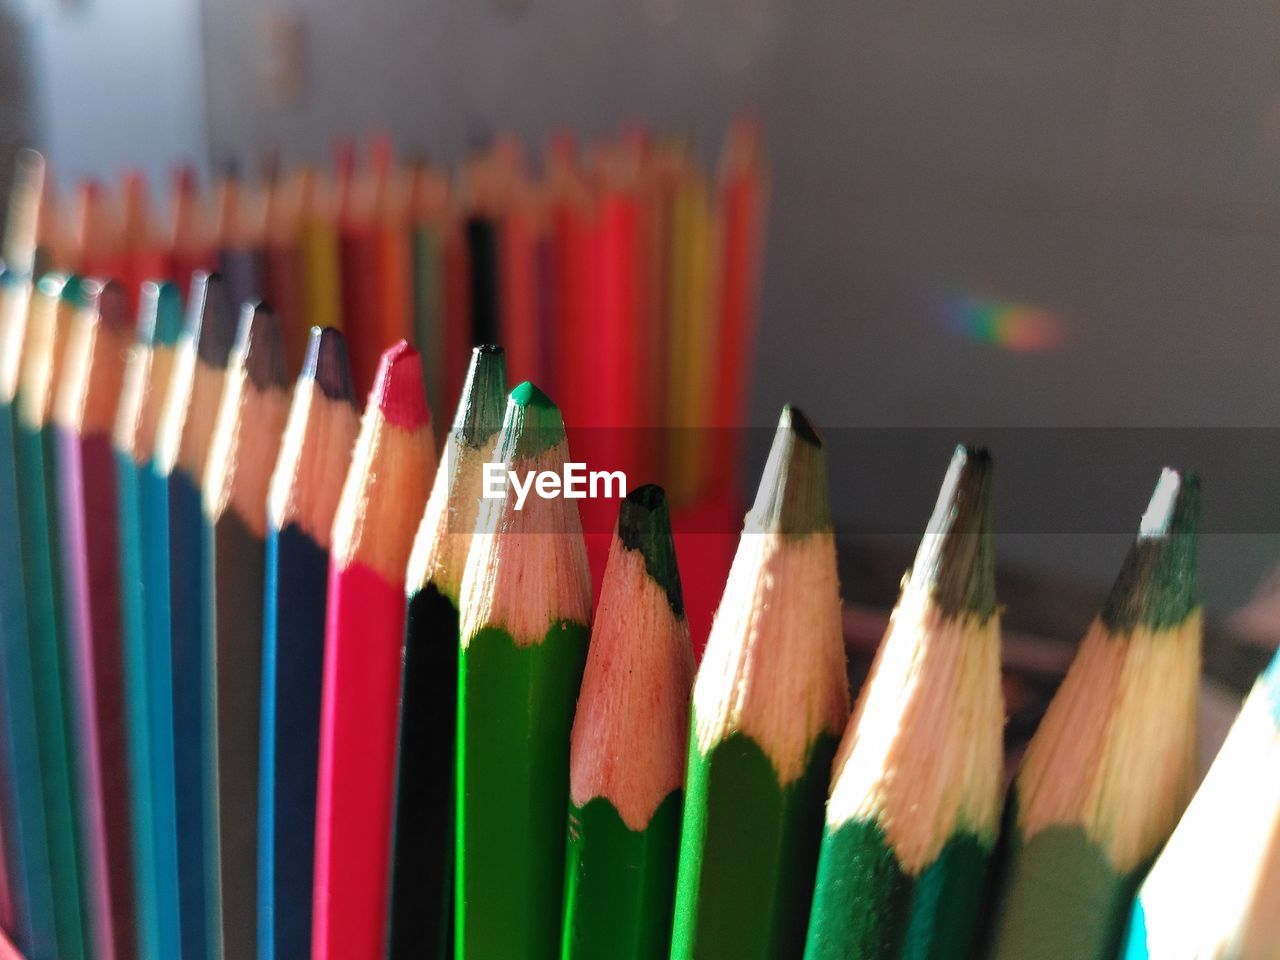 A row of colorful pencils